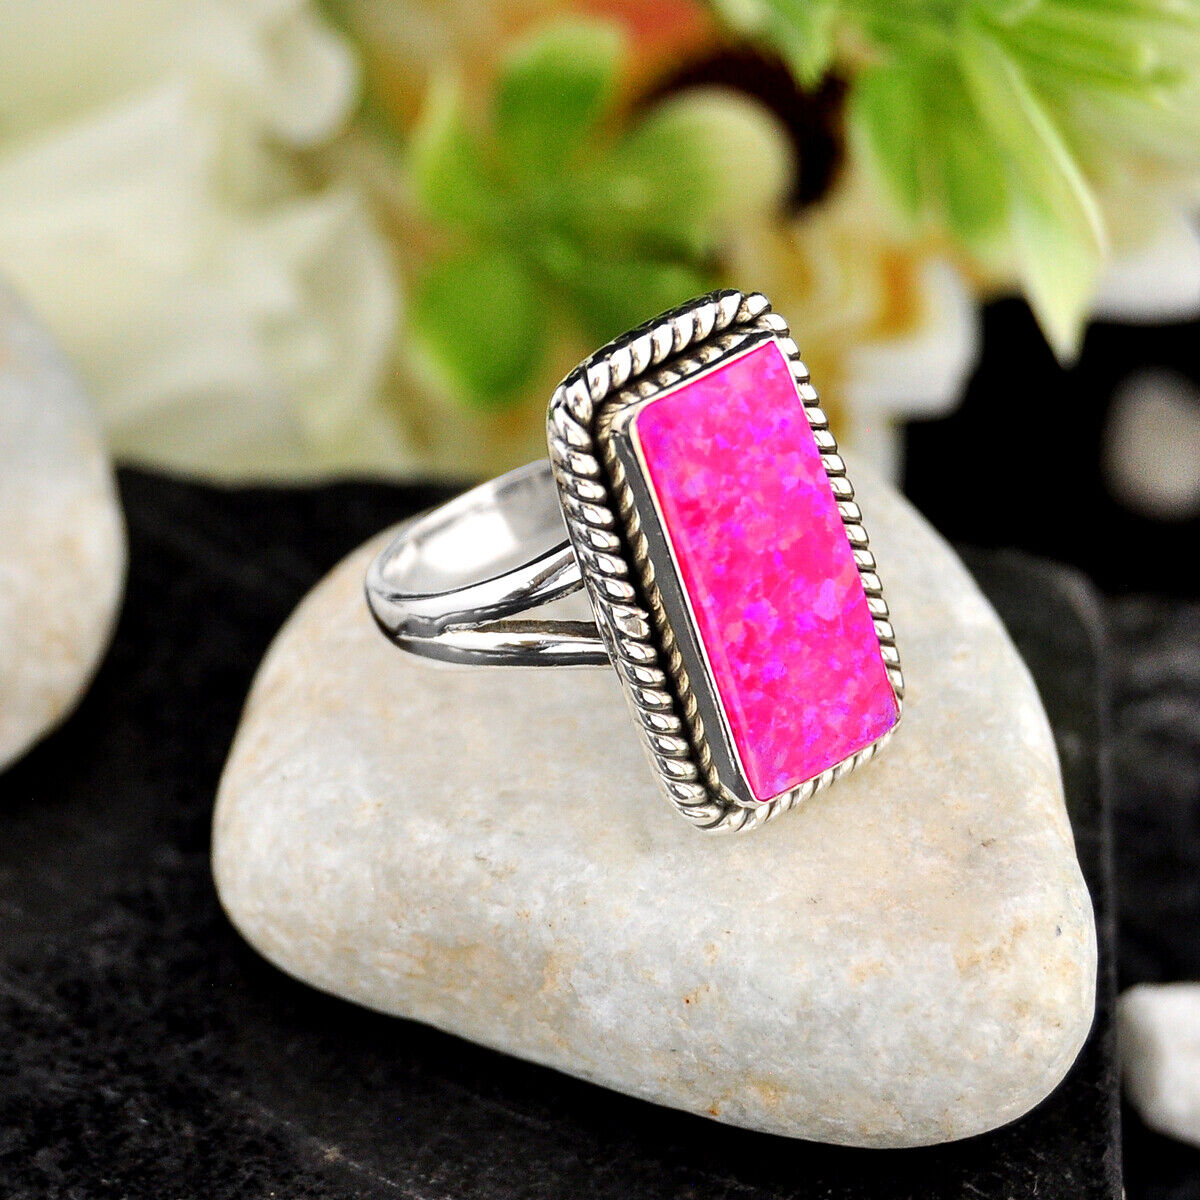 5.69cts Back Closed Hot Pink Opal Octagon Sterling Silver Ring Size 7.5 4815